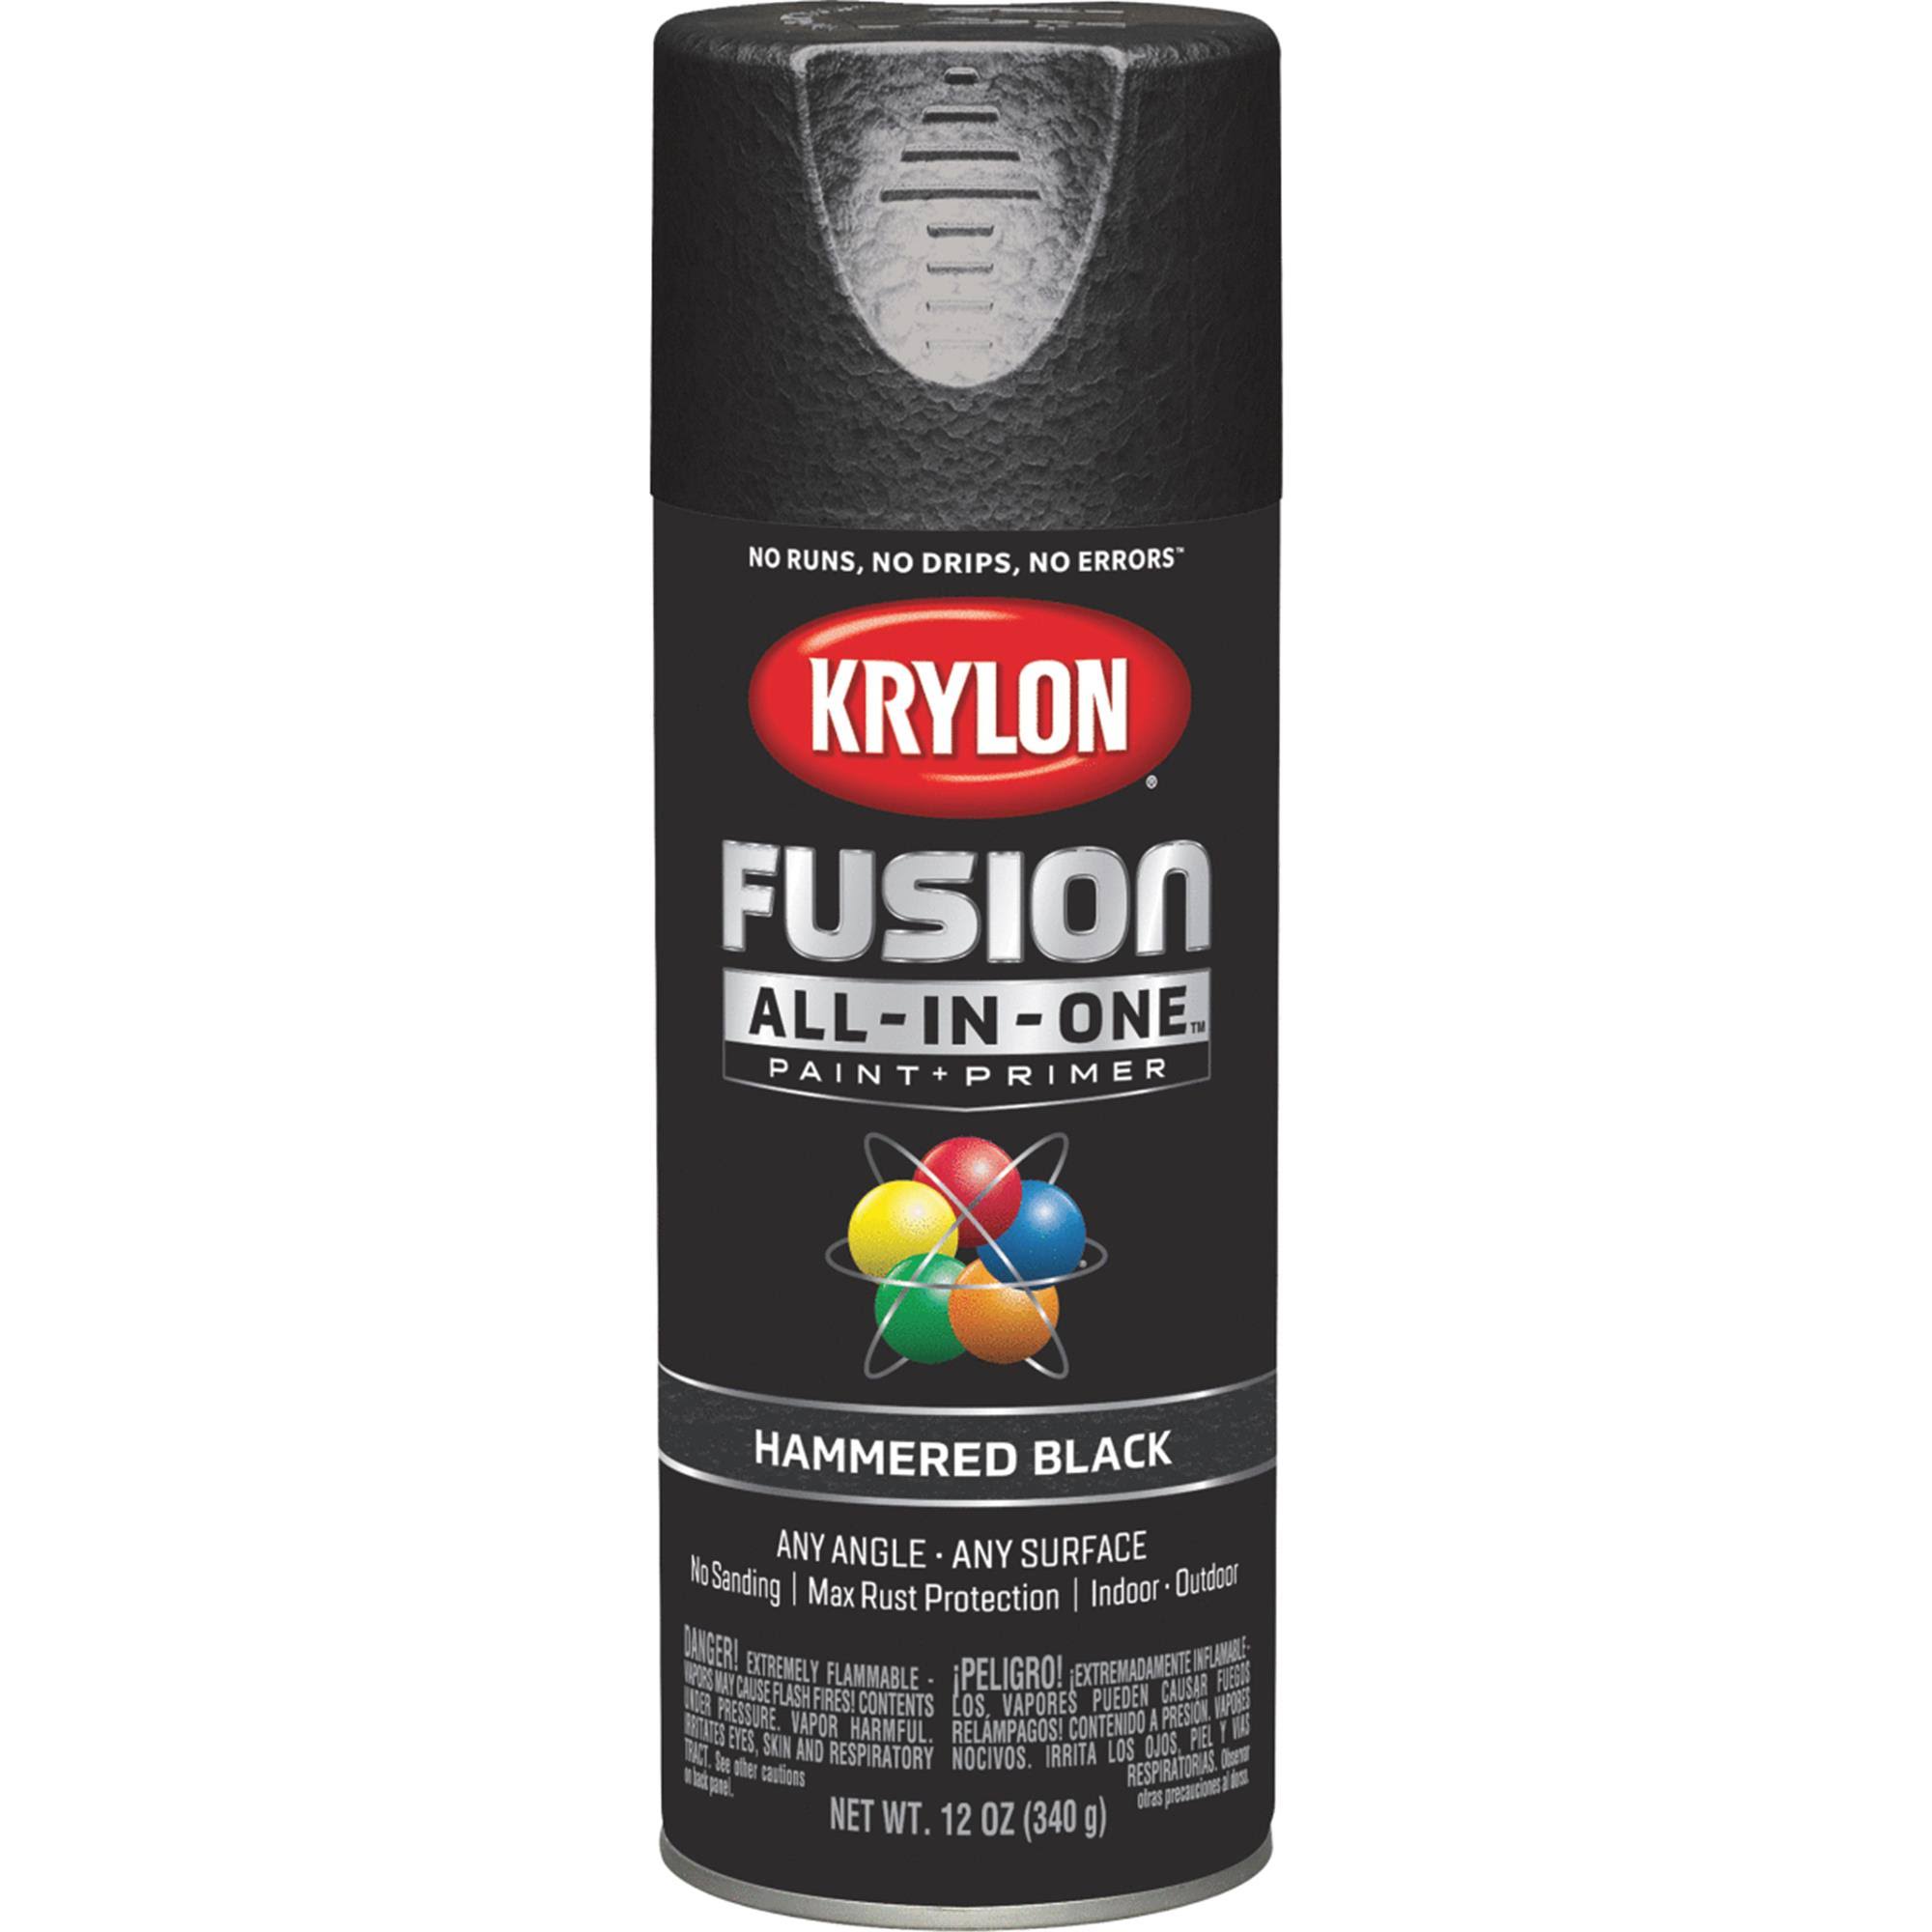 Krylon Hammered Black Fusion All-in-One Paint & Primer Spray